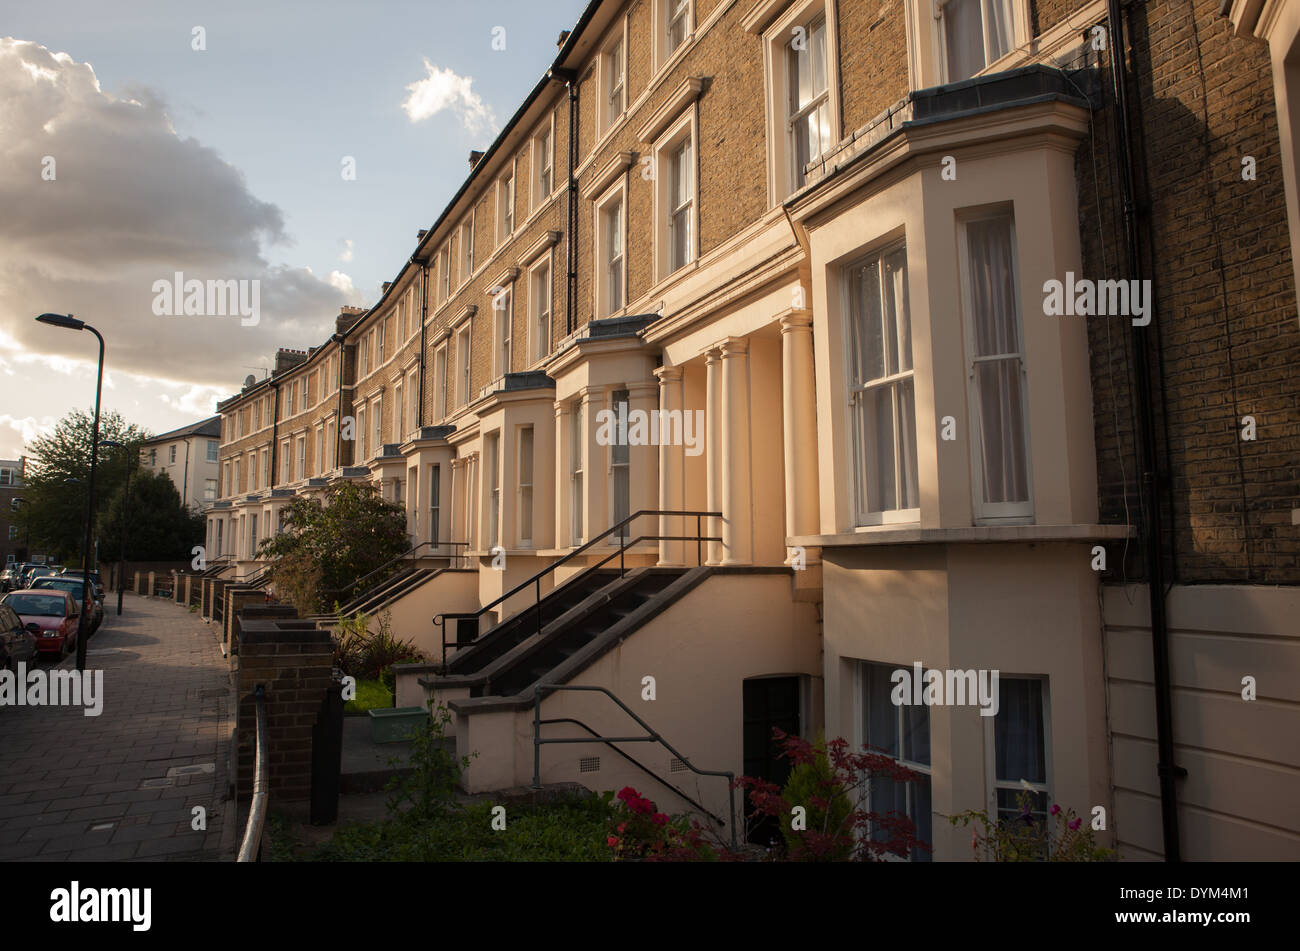 A row of typical Victorian Houses in East London Stock Photo